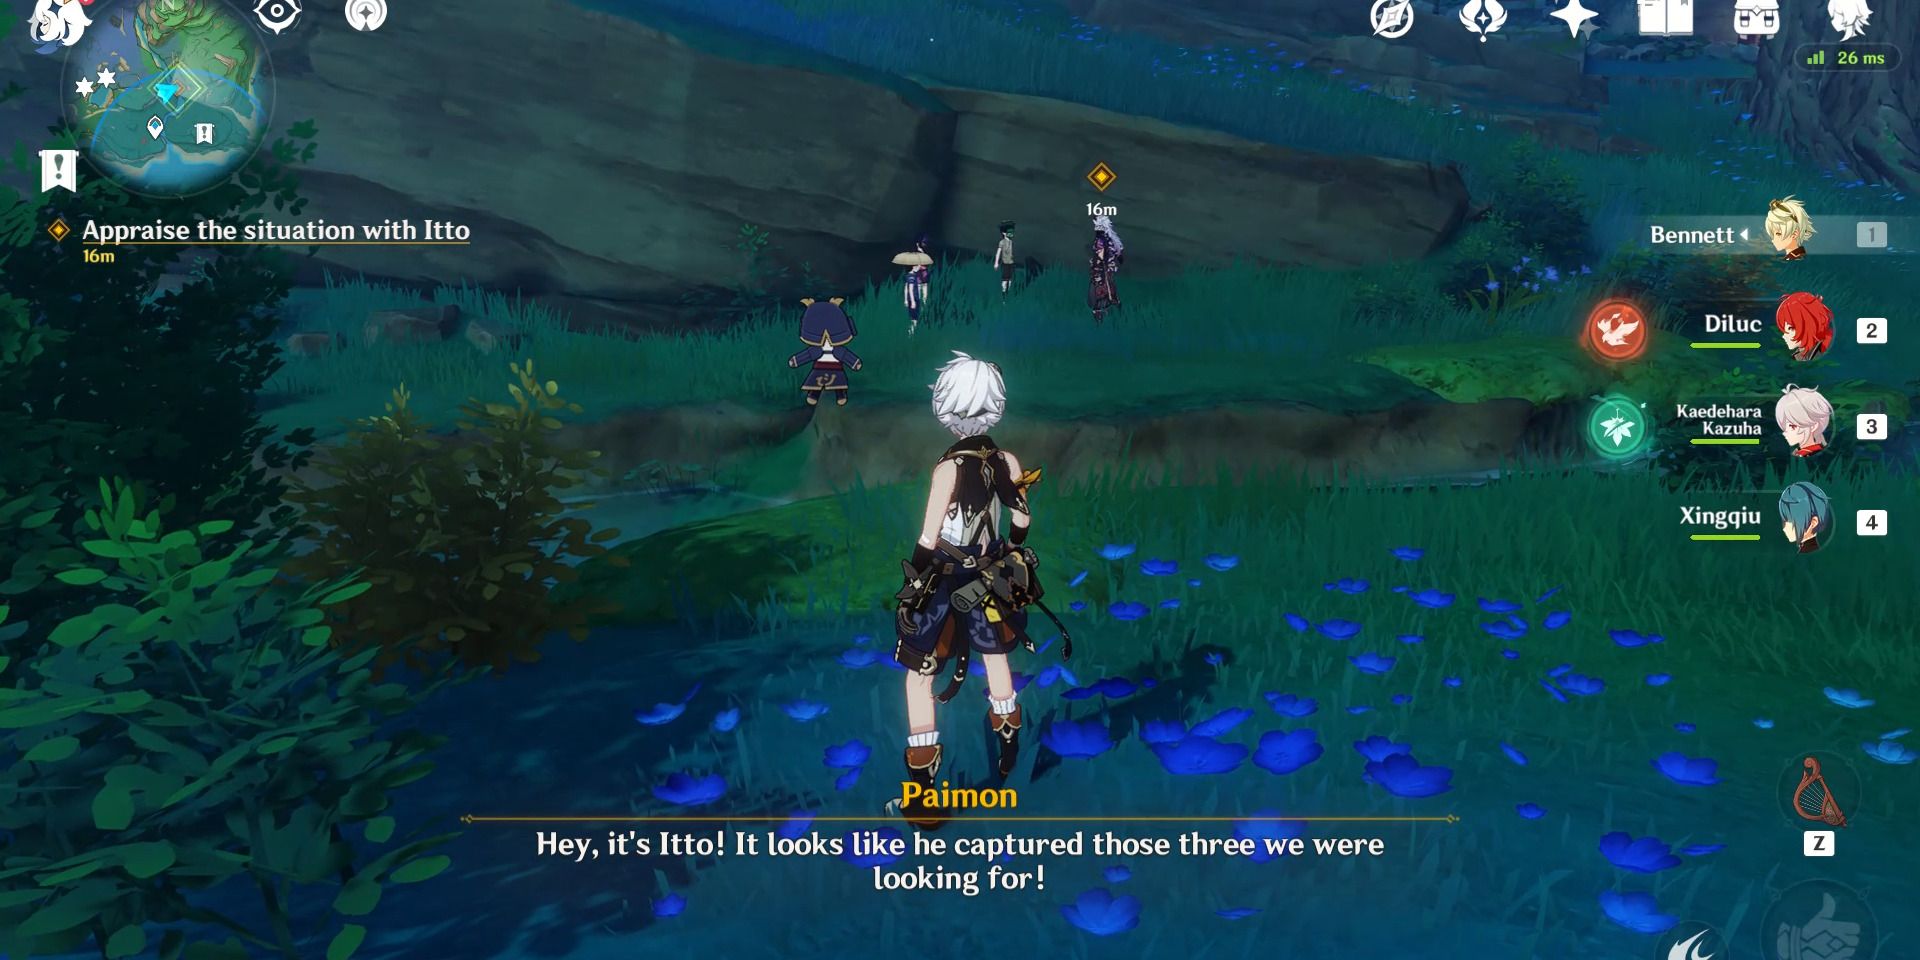 Image of Arataki Itto talking with the three Youkai in the Haunted Tales quest in Genshin Impact.